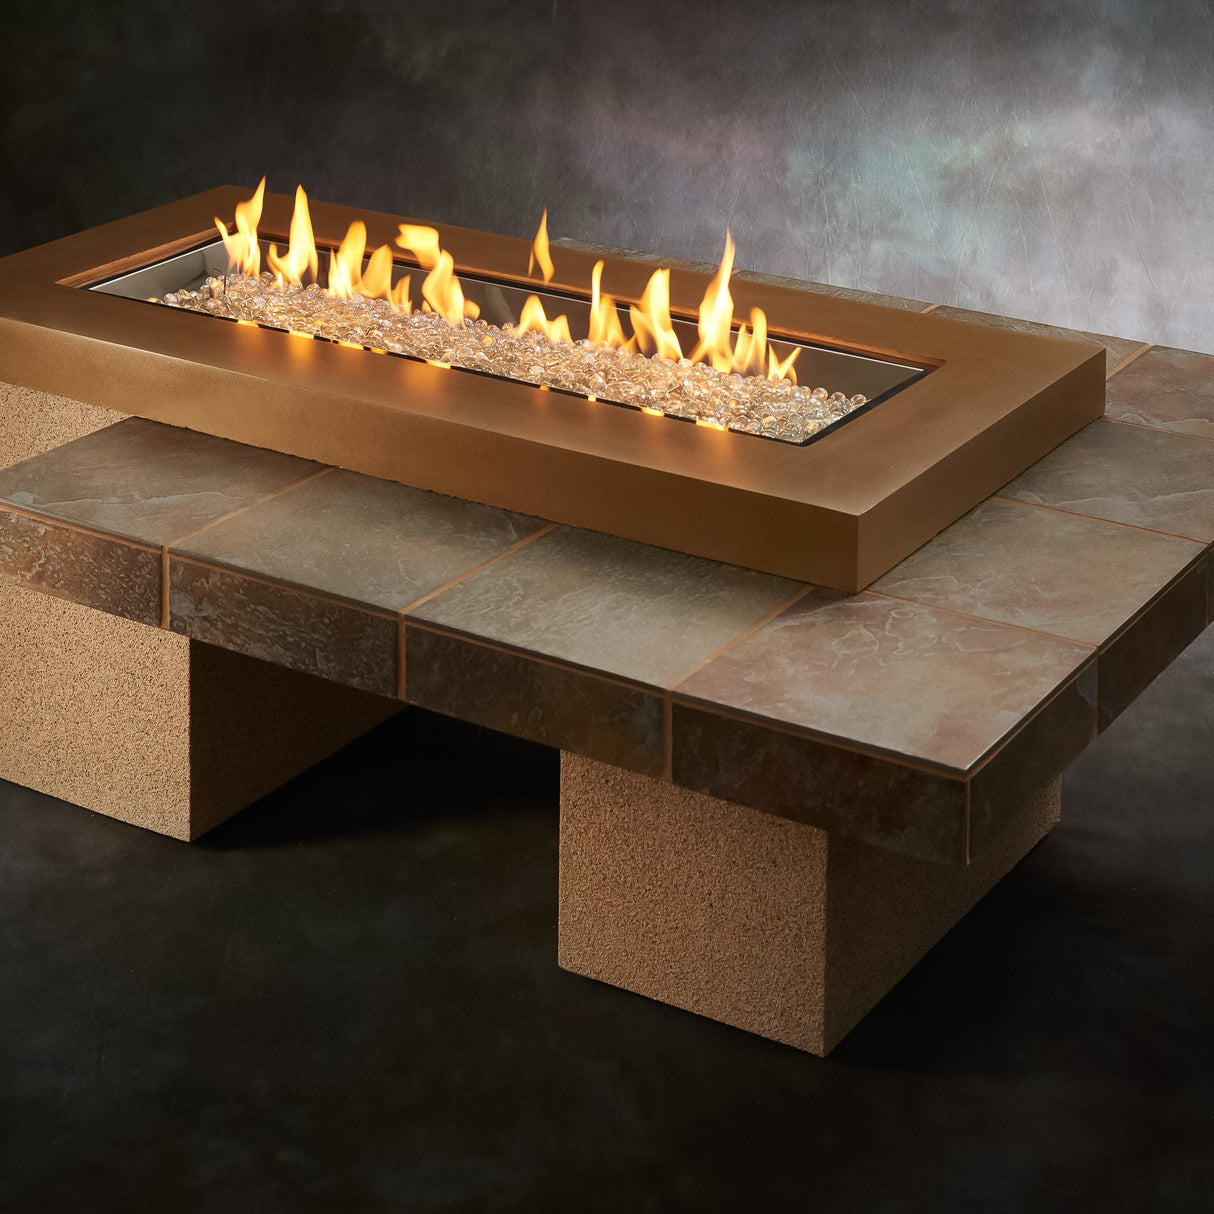 The Brown Uptown Linear Gas Fire Pit Table on a studio background